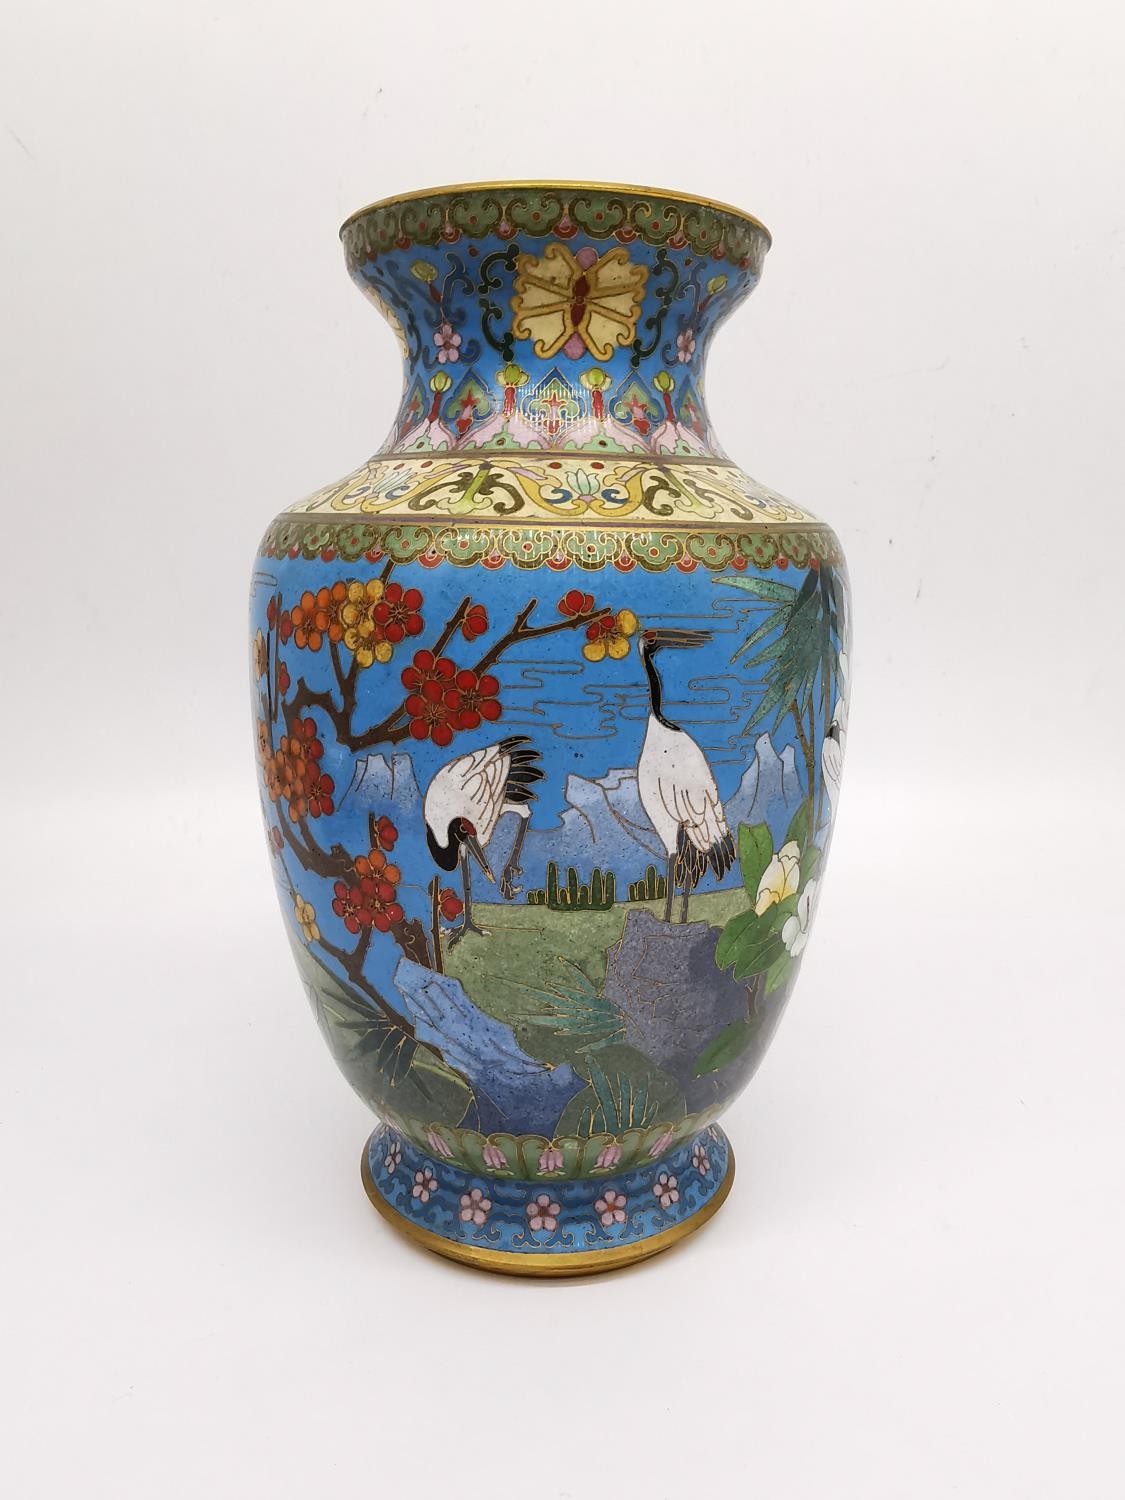 An early 20th century Chinese cloisonné enamel gilt bronze vase with crane, peony and cherry blossom - Image 2 of 9